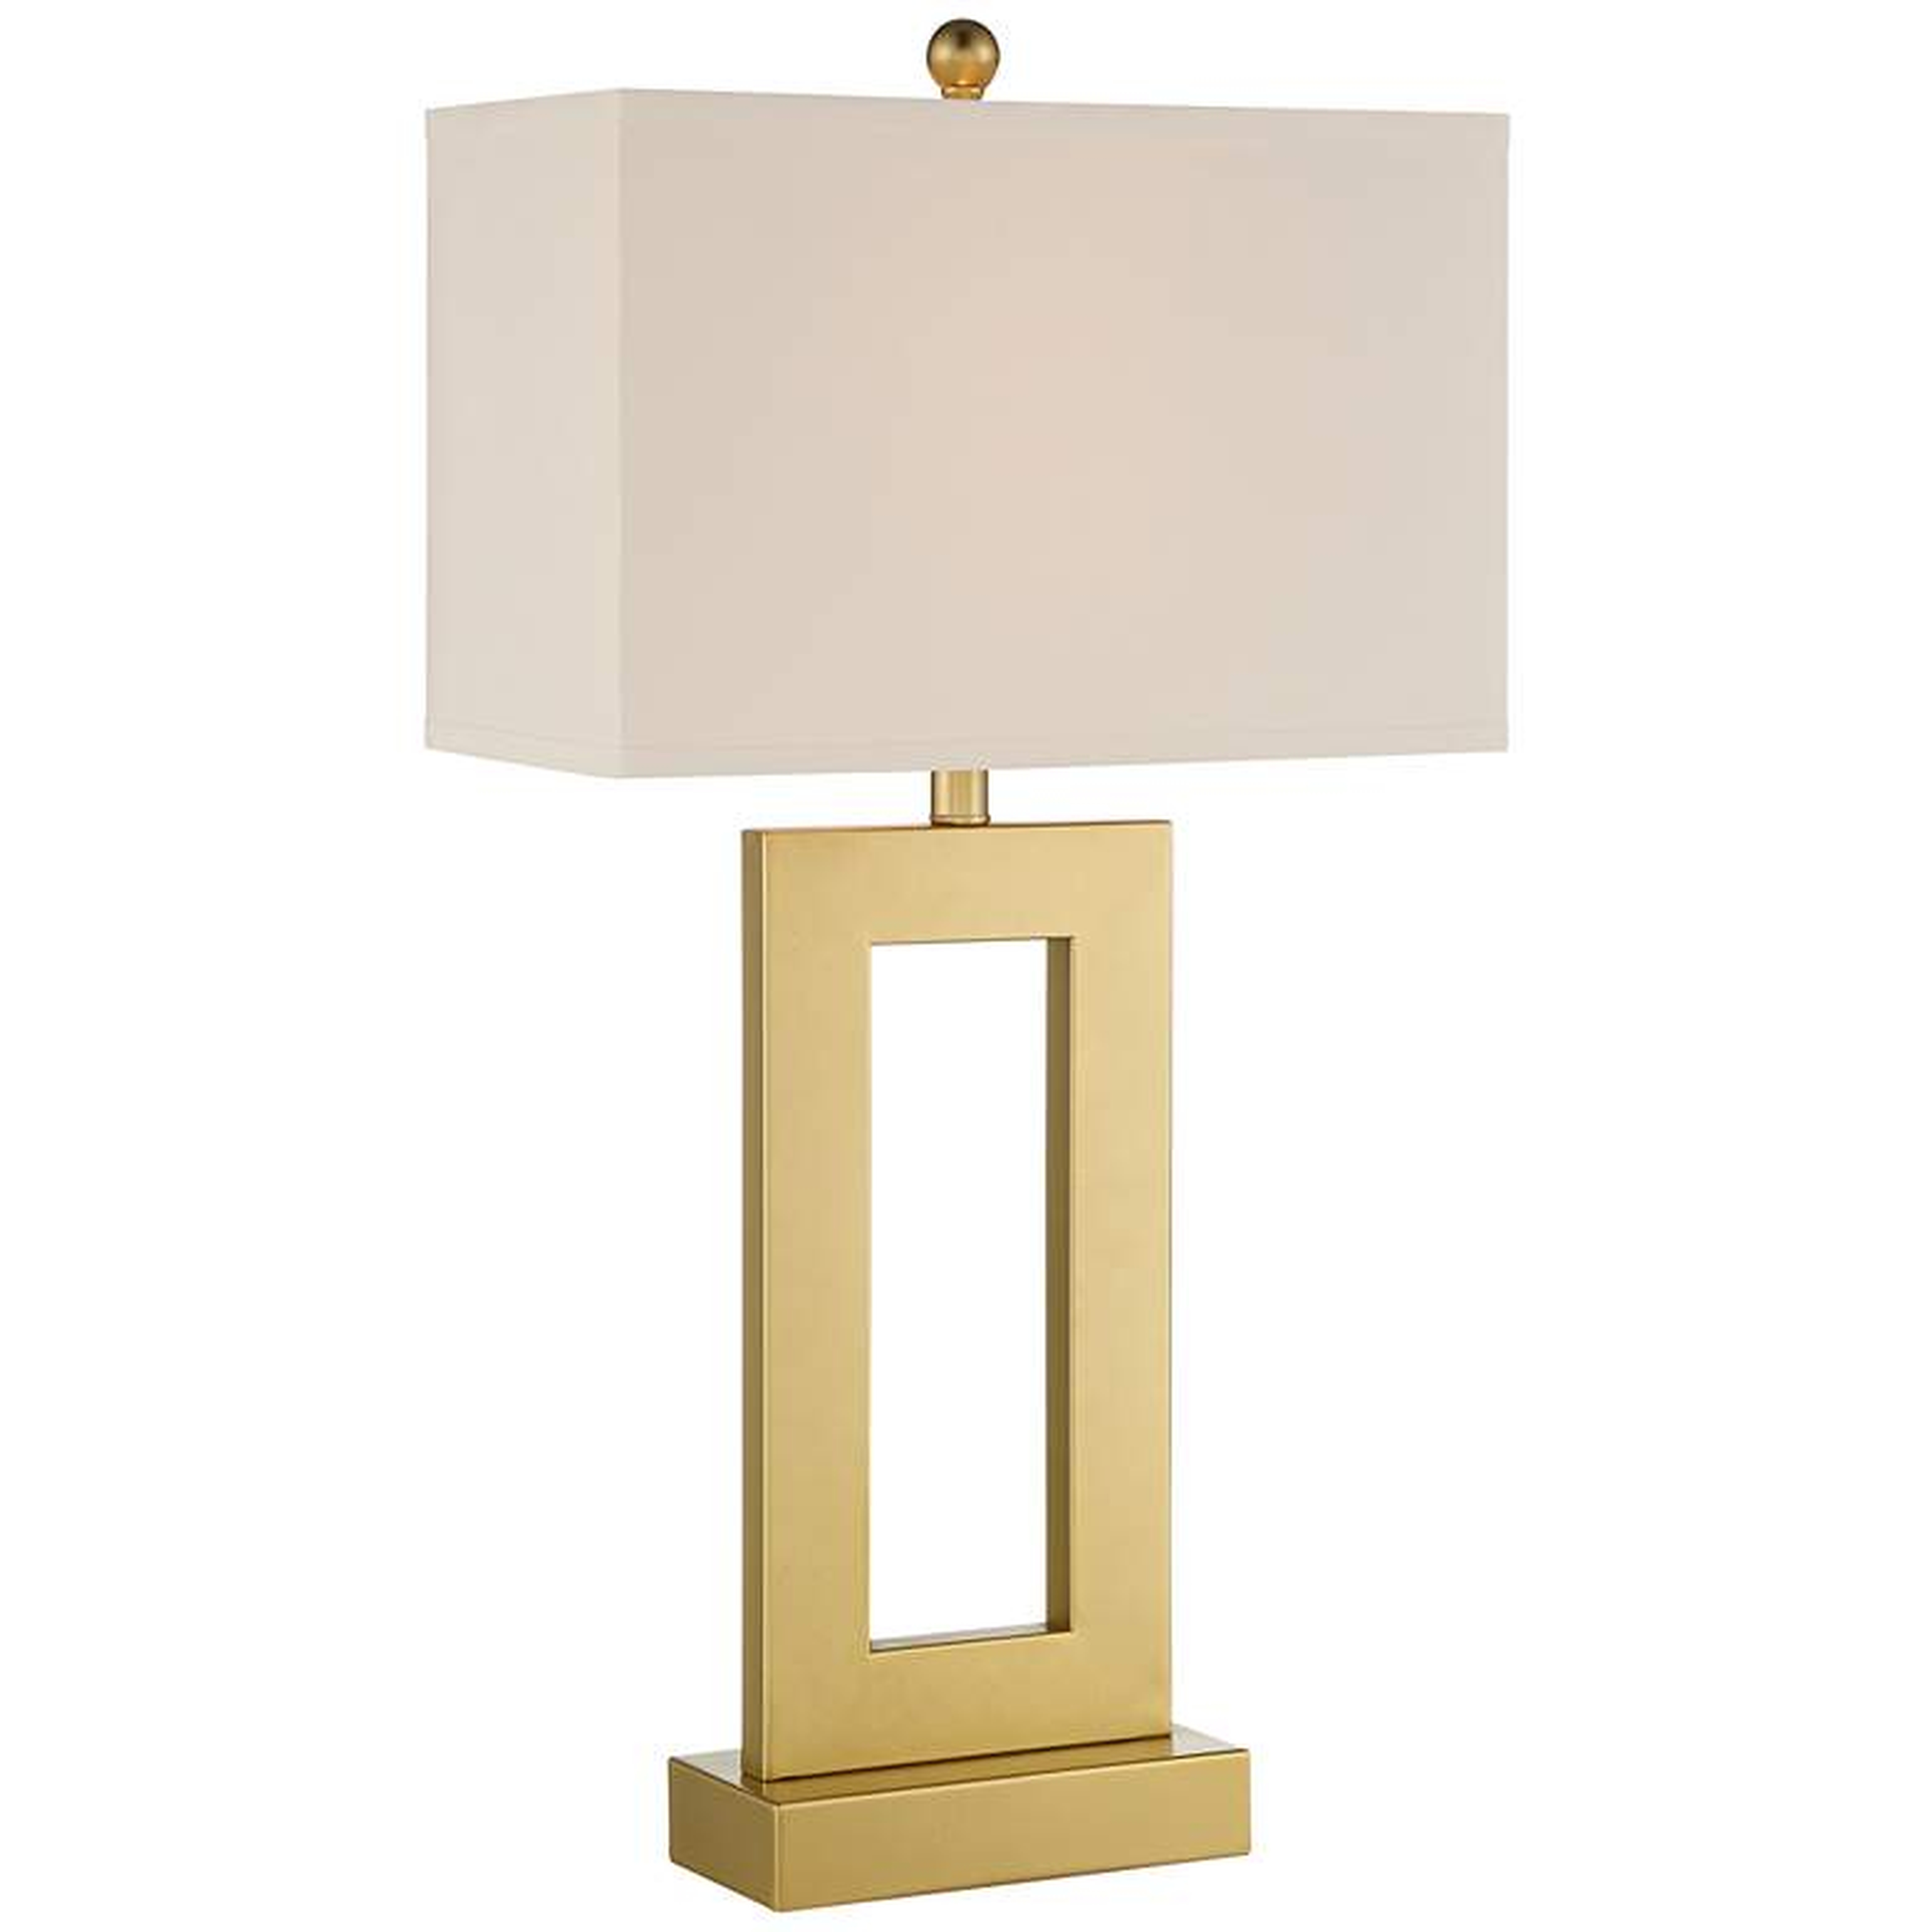 Marshall Modern Square Table Lamp, Gold - Lamps Plus